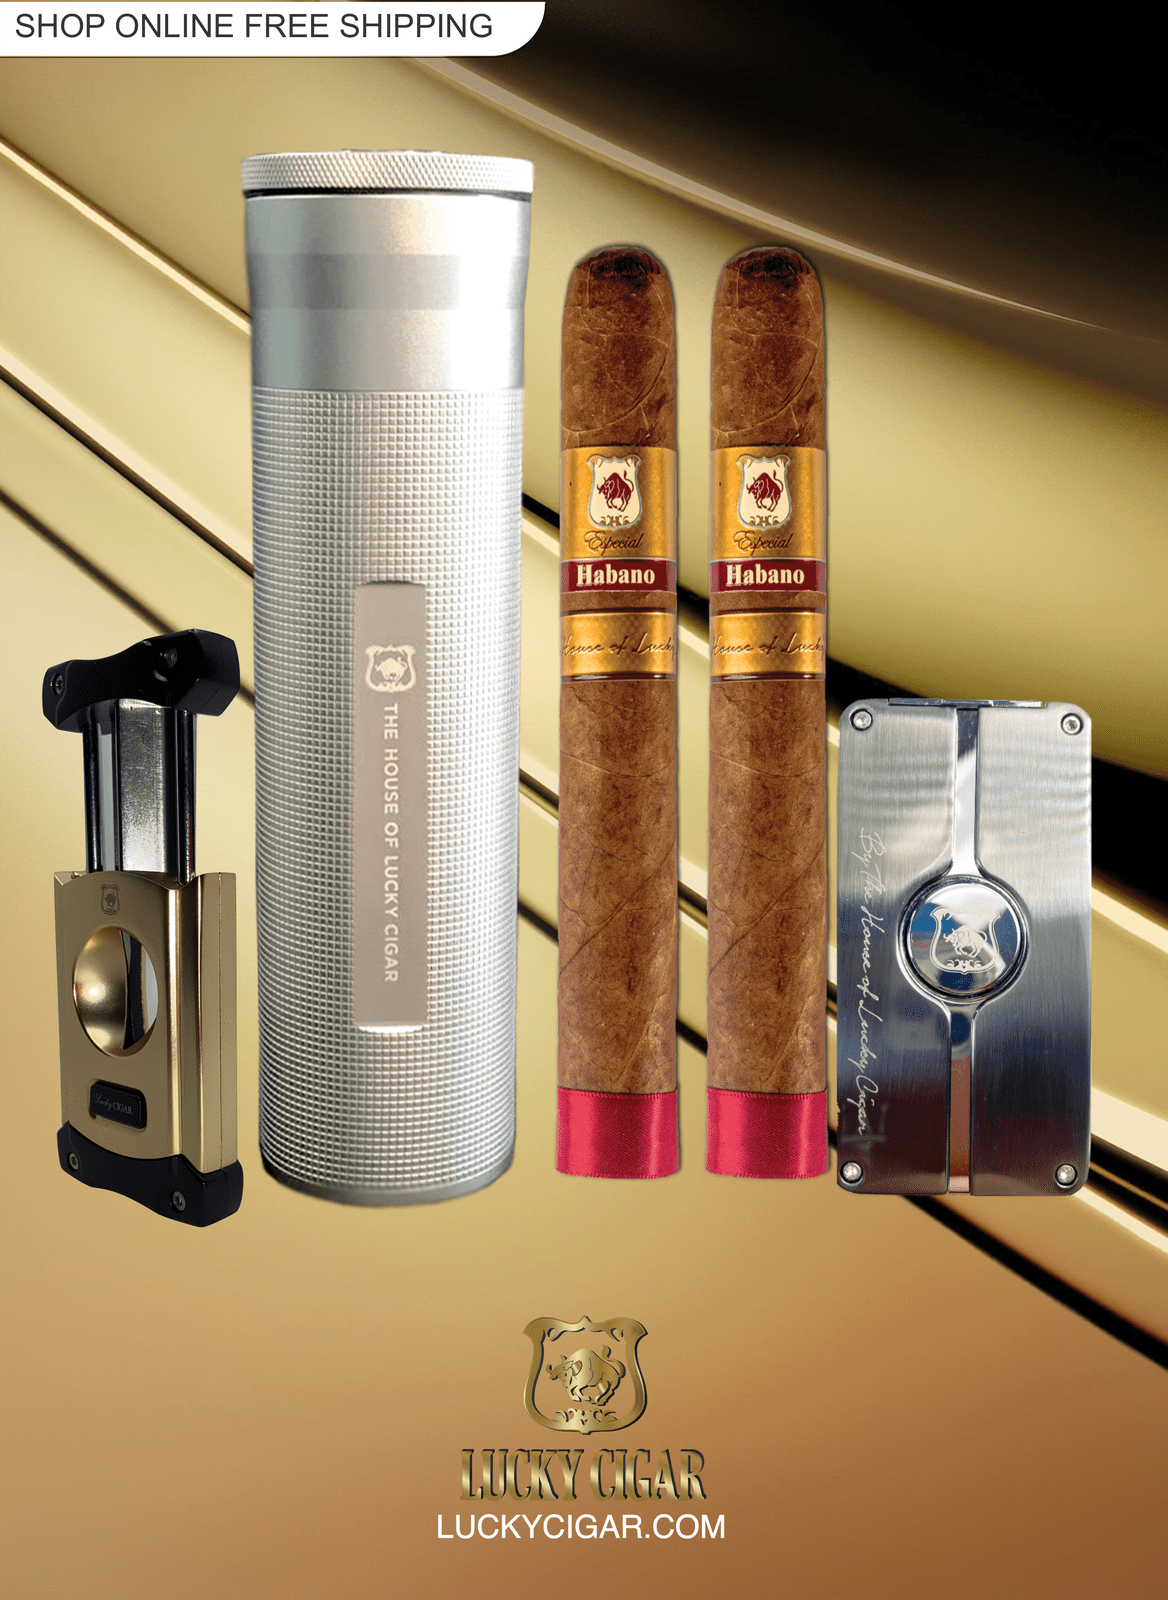 Habano Cigars: Especial Habano by Lucky Cigar: Set of 2 Cigars with Lighter, Cutter, Torch